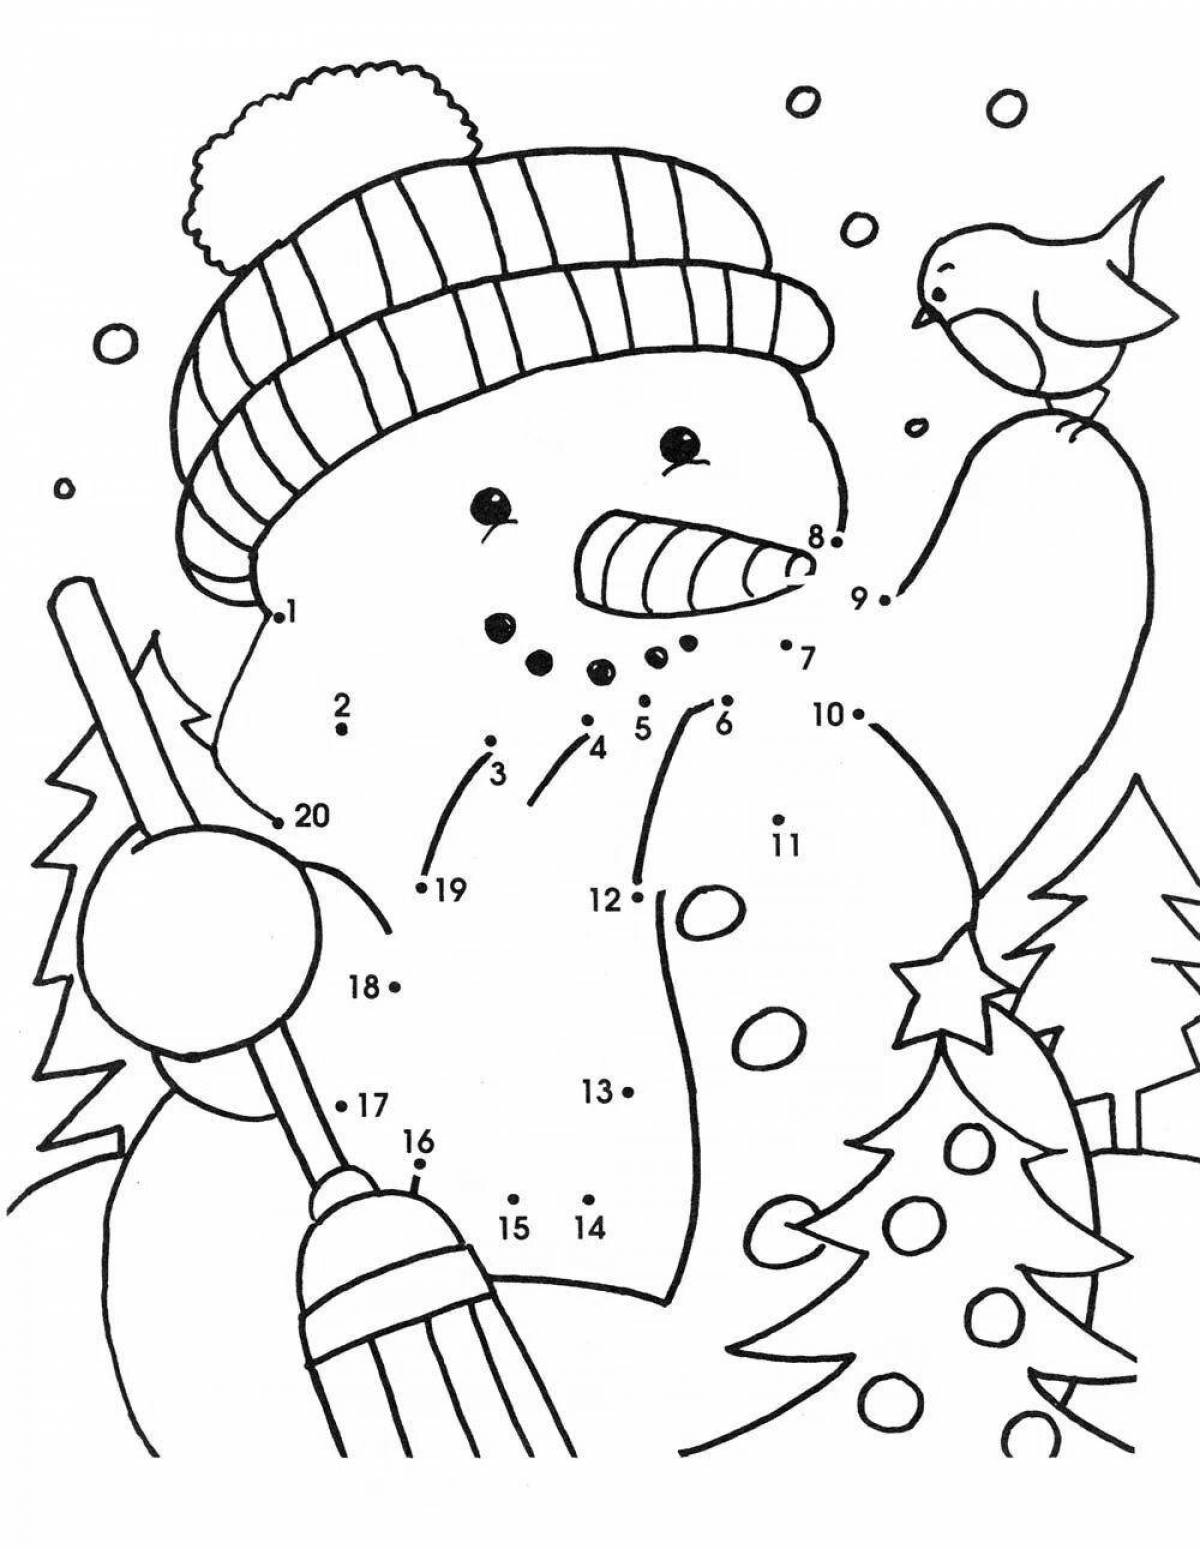 Glamorous coloring by numbers snowman